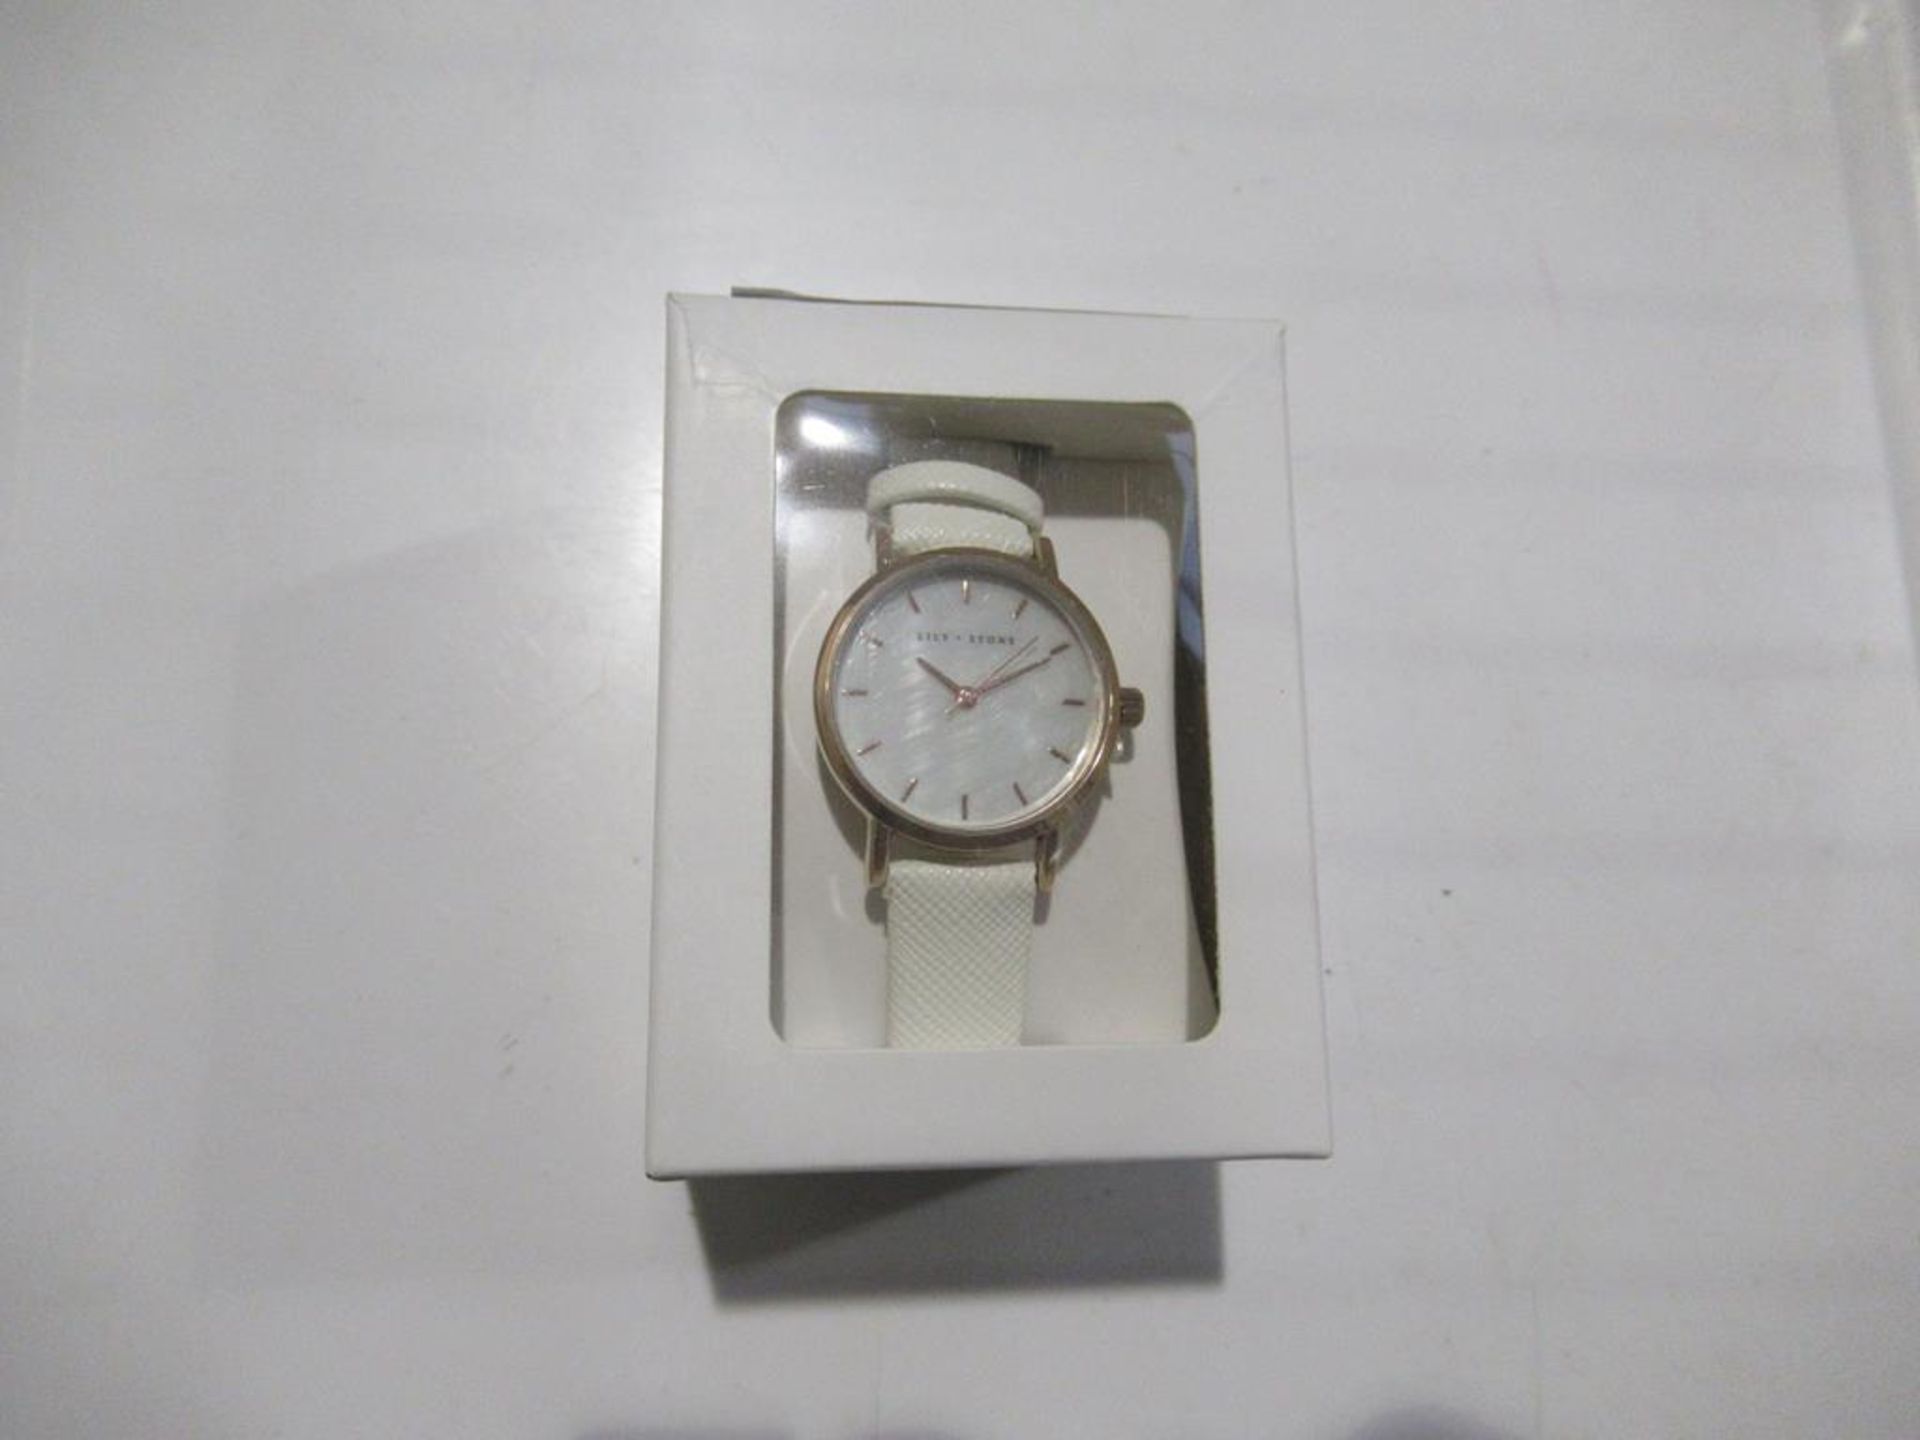 5x assorted Lily and Stone watches, total approx. RP £135 - Image 2 of 3